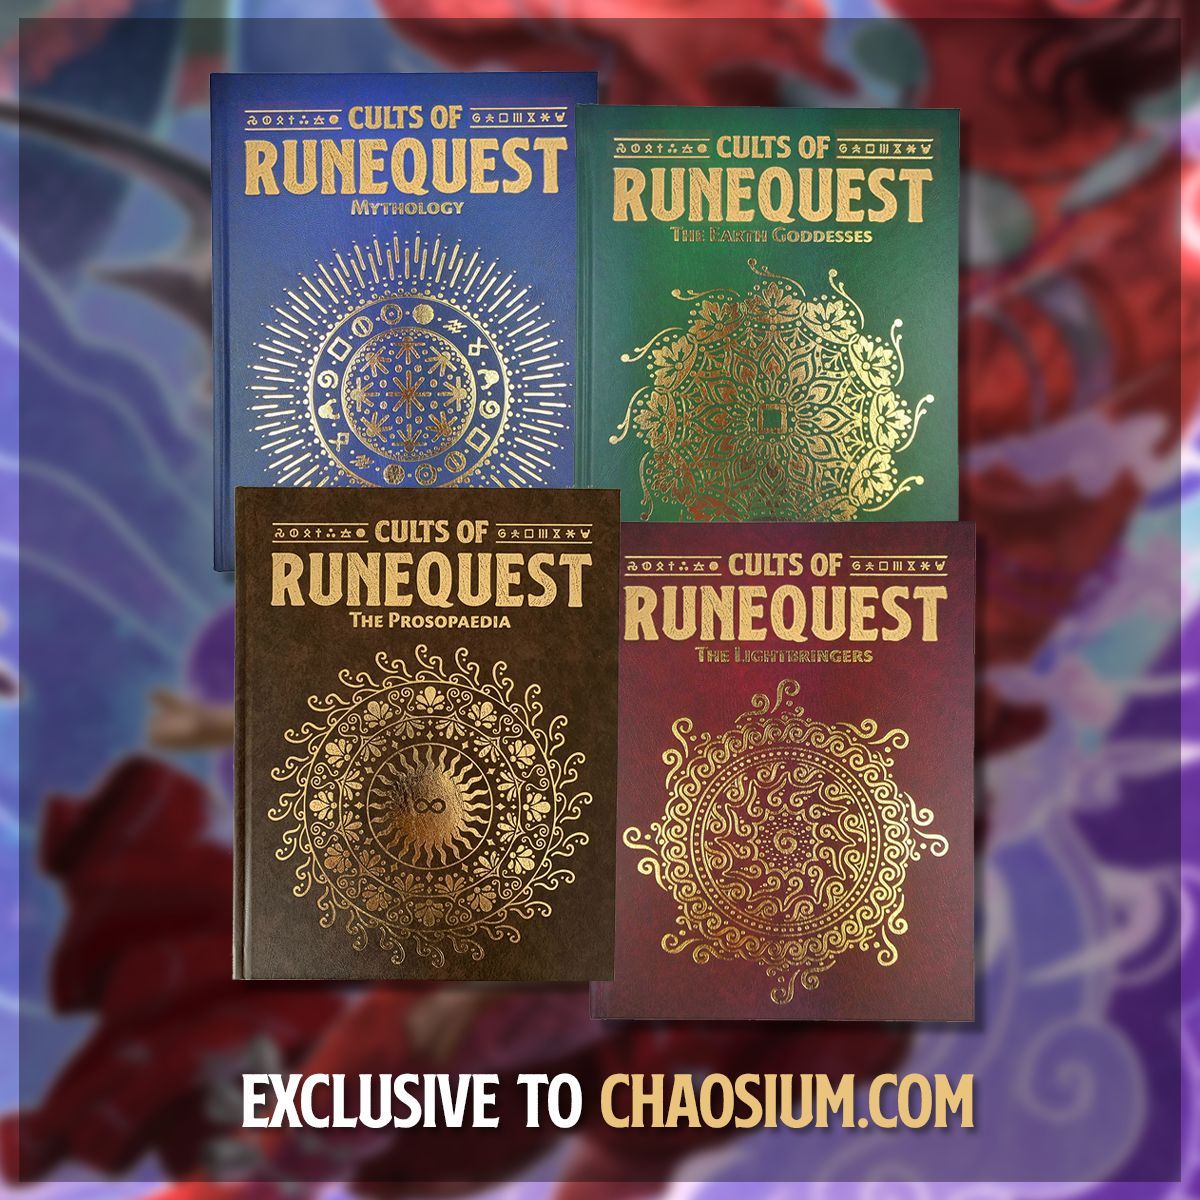 Build a collection worthy of the gods!

All Cults of RuneQuest titles are available in premium collector leatherette editions. 

Gets yours—only on Chaosium.com! 

buff.ly/3xzbvIn